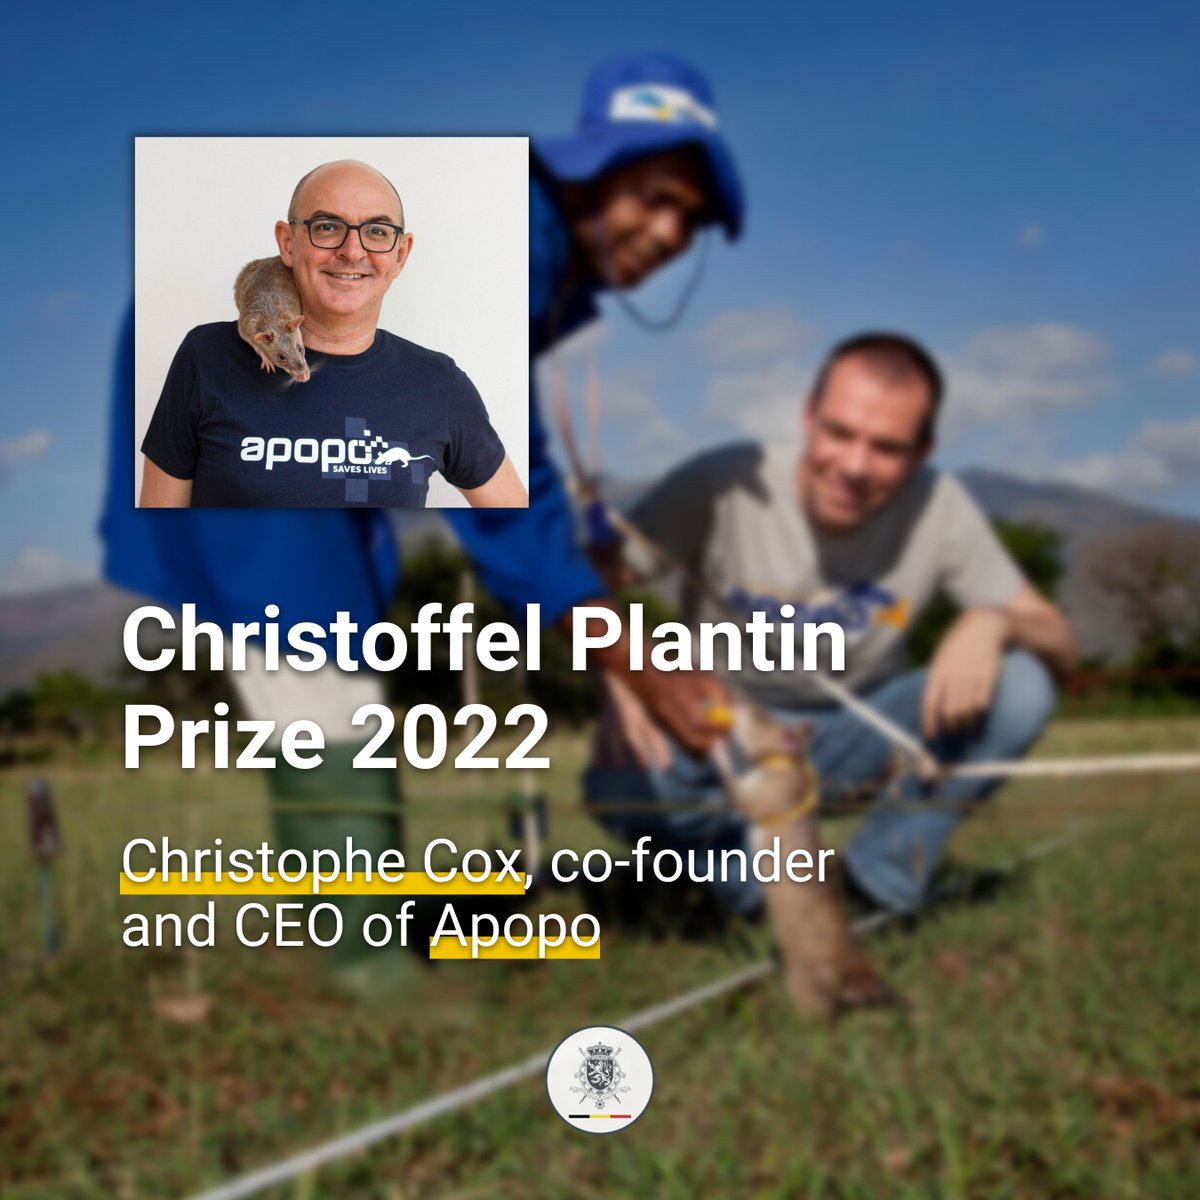 👏 Congratulations to Apopo, whose Belgian CEO Christophe Cox, received the Christoffel Plantin Prize 2022 for his contribution to the prestige of our country abroad! @HeroRATs trains rats to detect landmines, making a substantial contribution to the fight against these weapons.